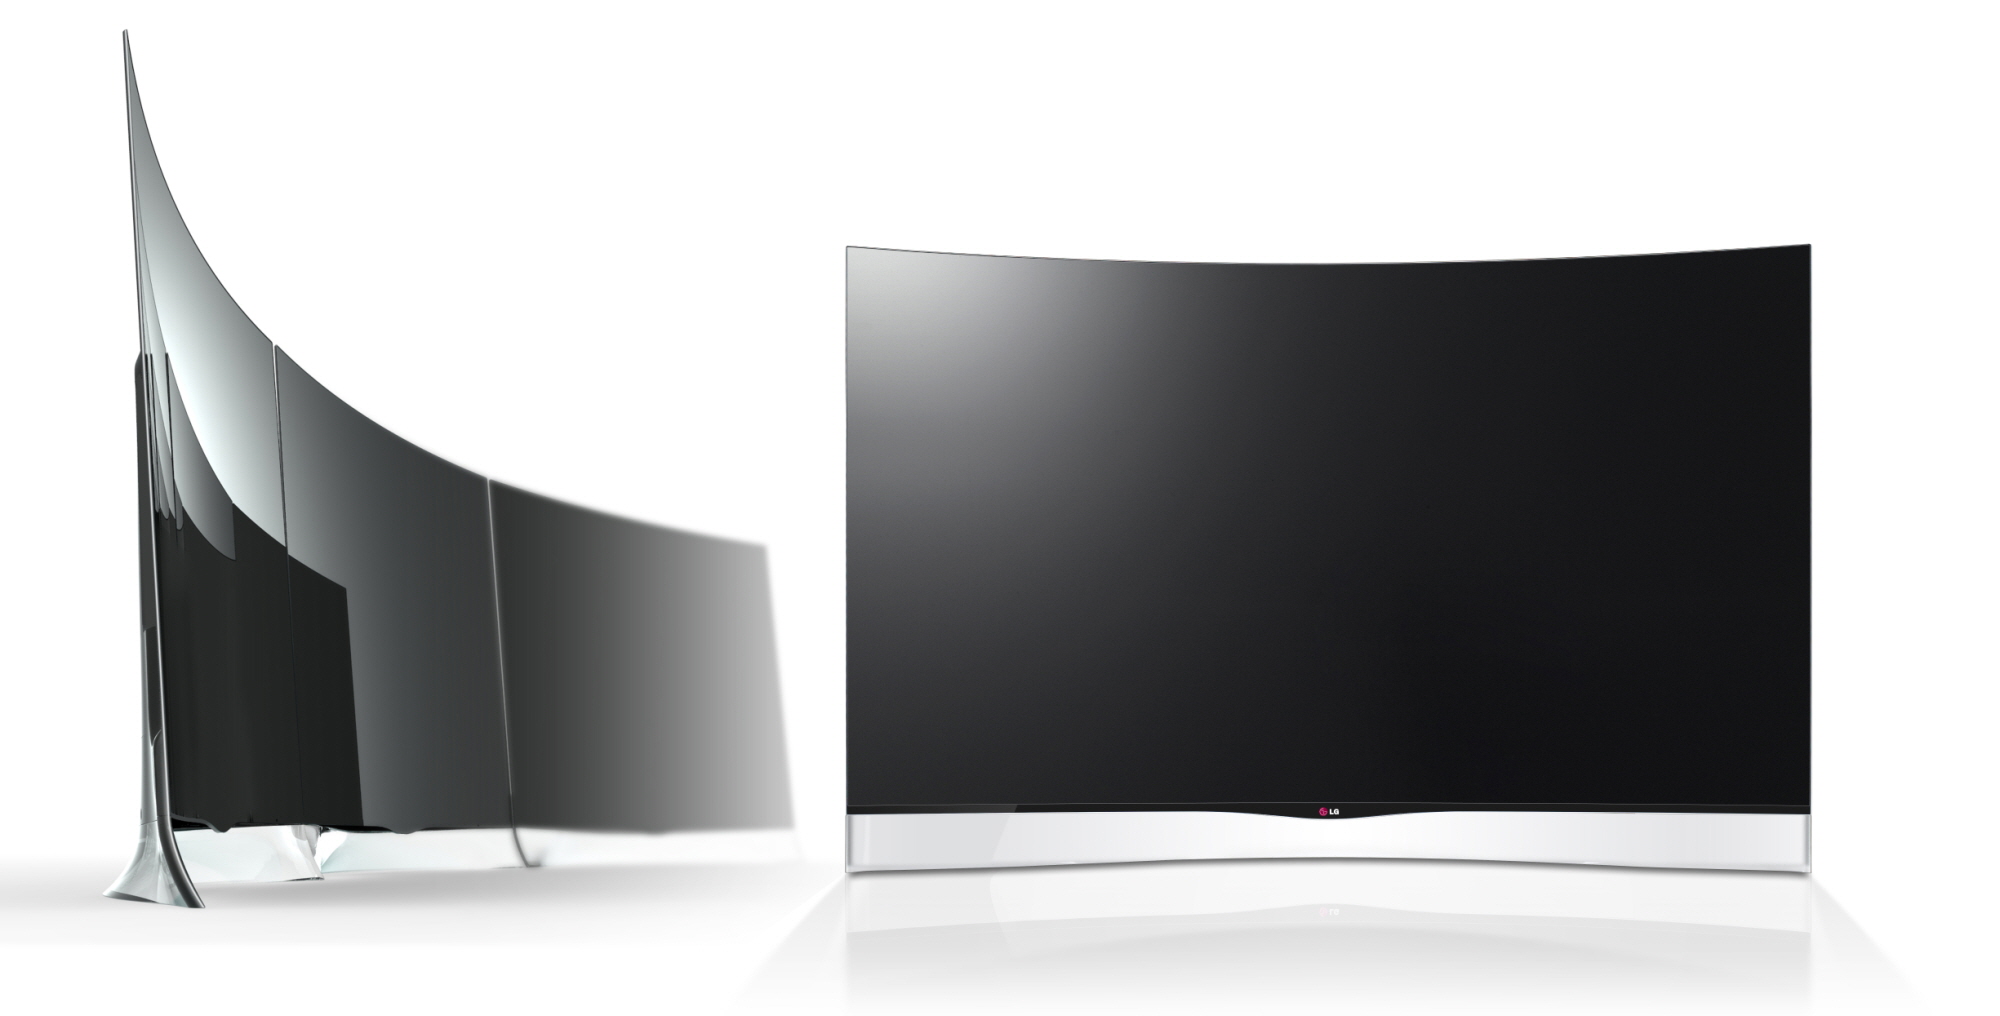 Two LG CURVED OLED TVs, model 55EA9800, one facing right and the other facing the front